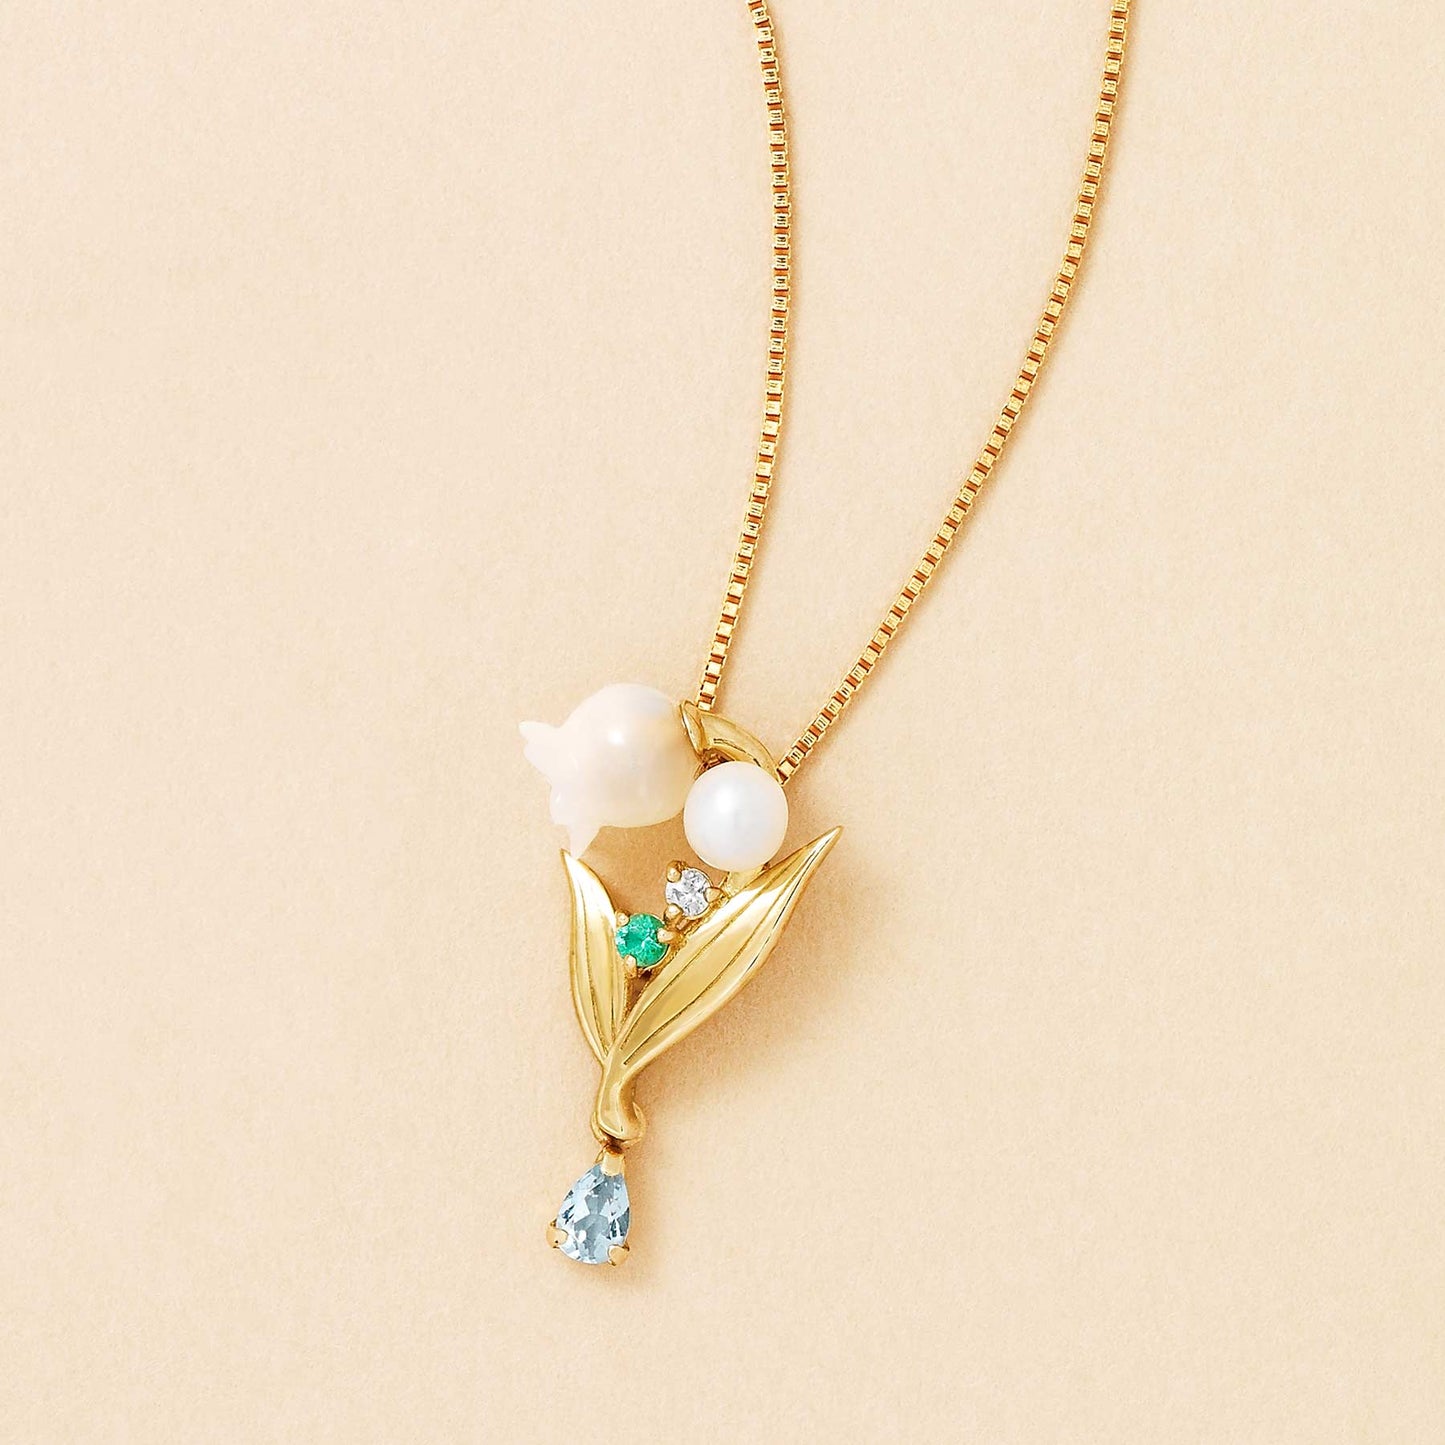 [Birth Flower Jewelry] May Lily of the valley Necklace - Product Image